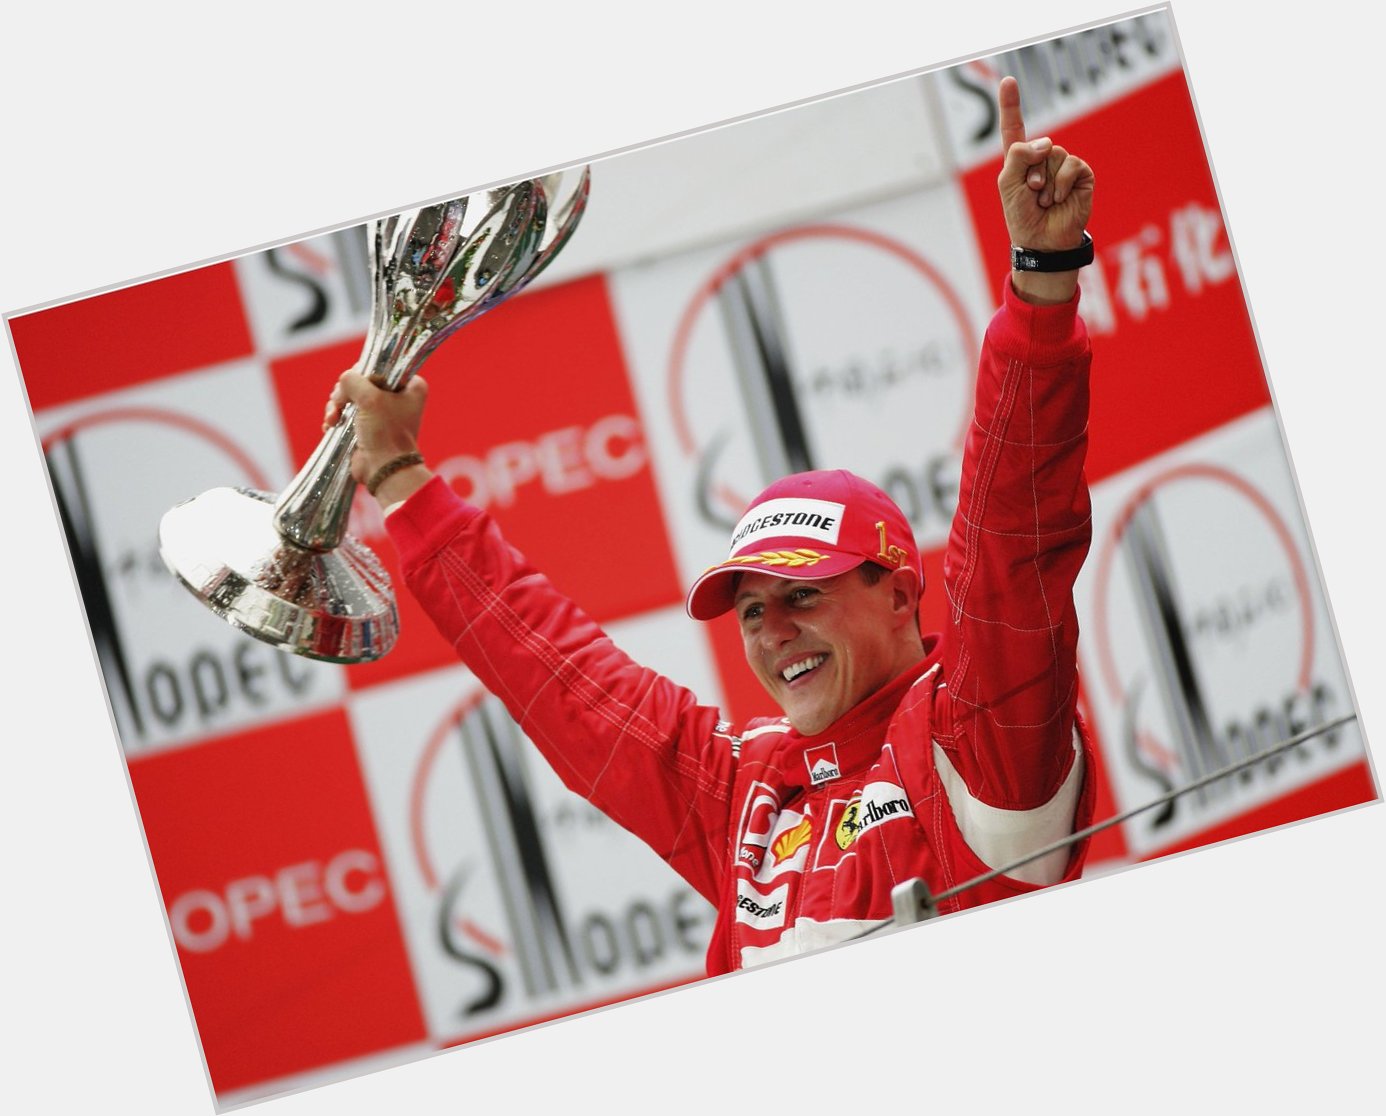 Happy birthday to Michael Schumacher

The seven-time world champion turns 49 today.  